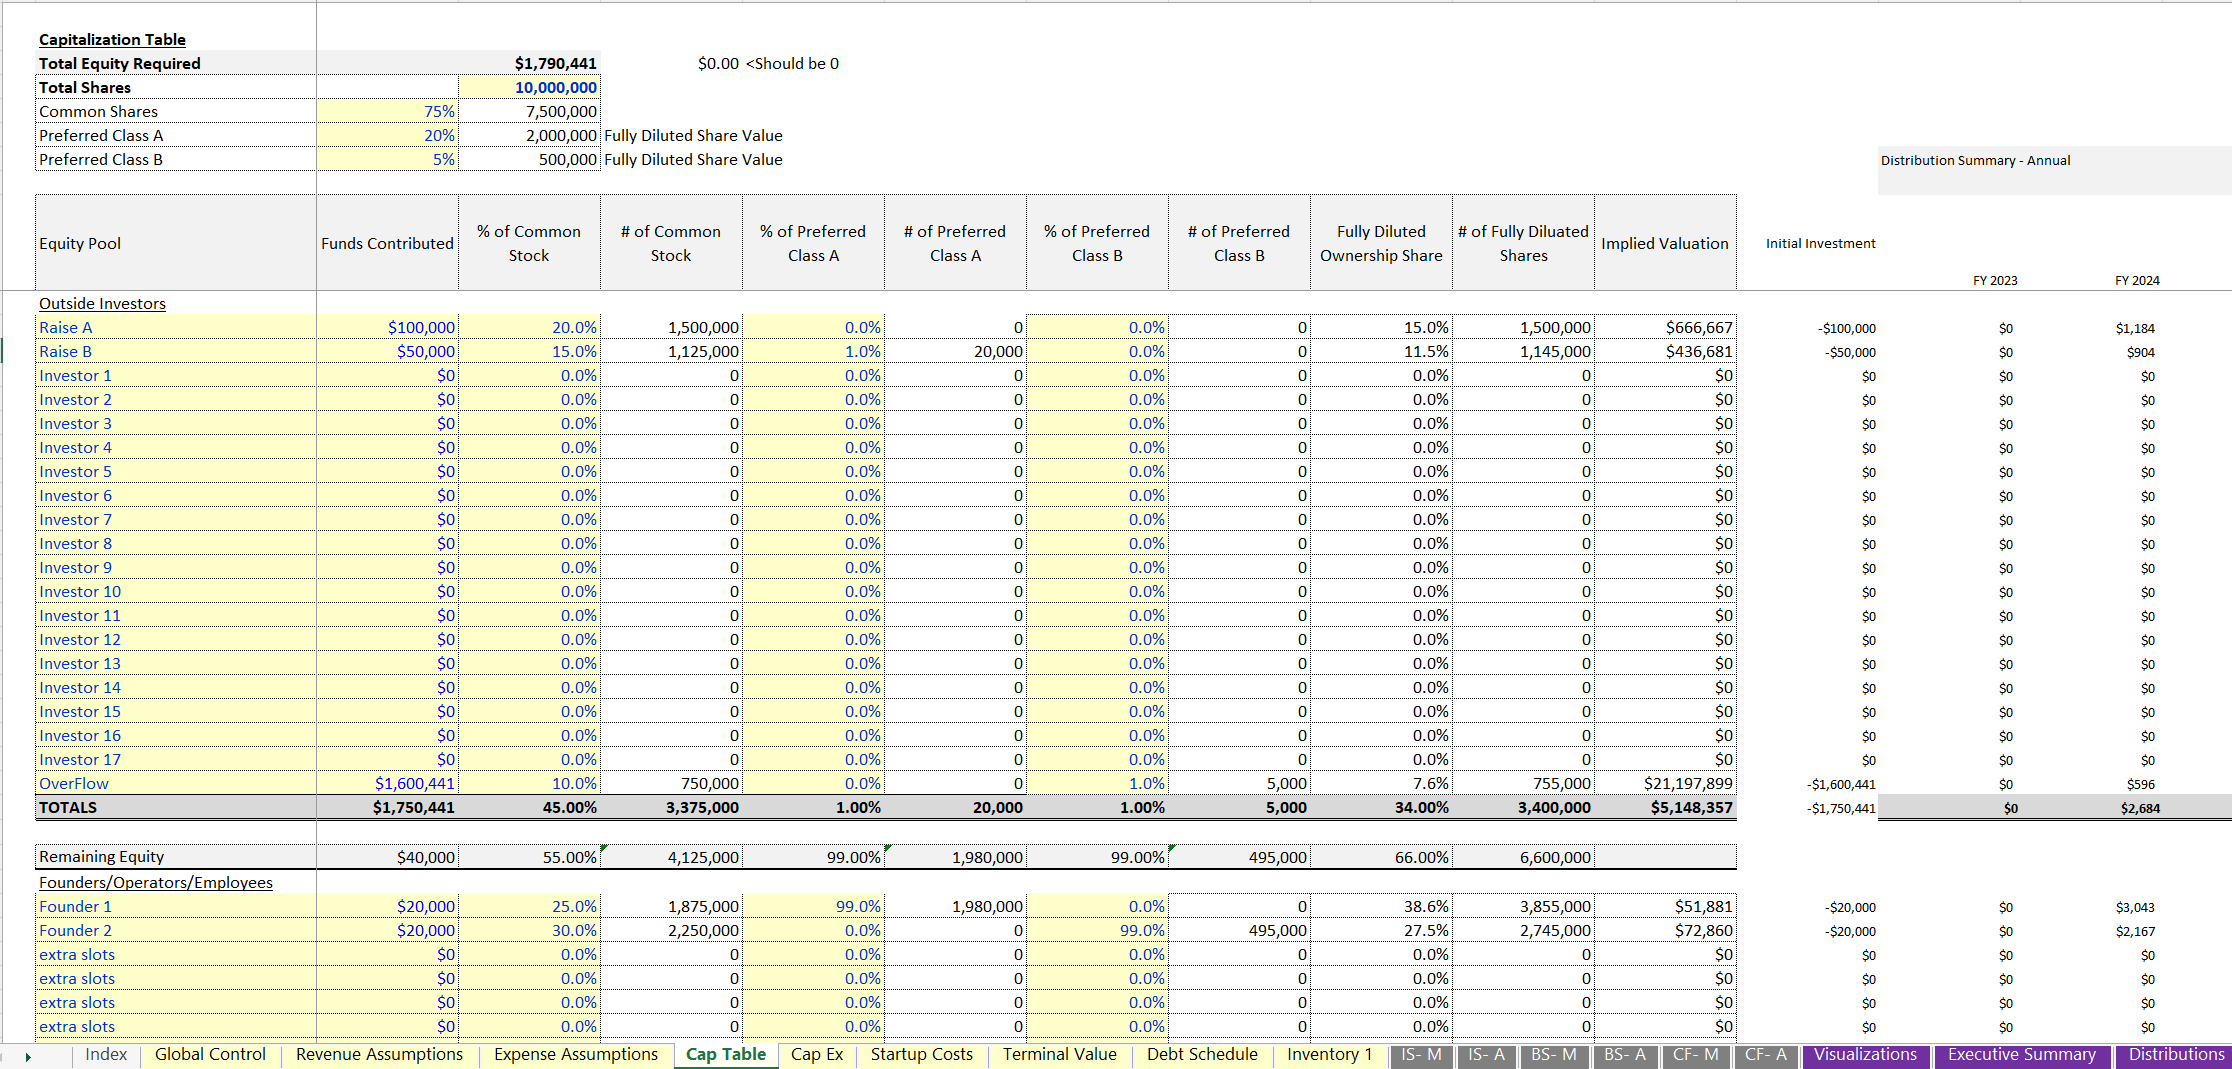 Plumbing Business Scaling Financial Model (Excel workbook (XLSX)) Preview Image